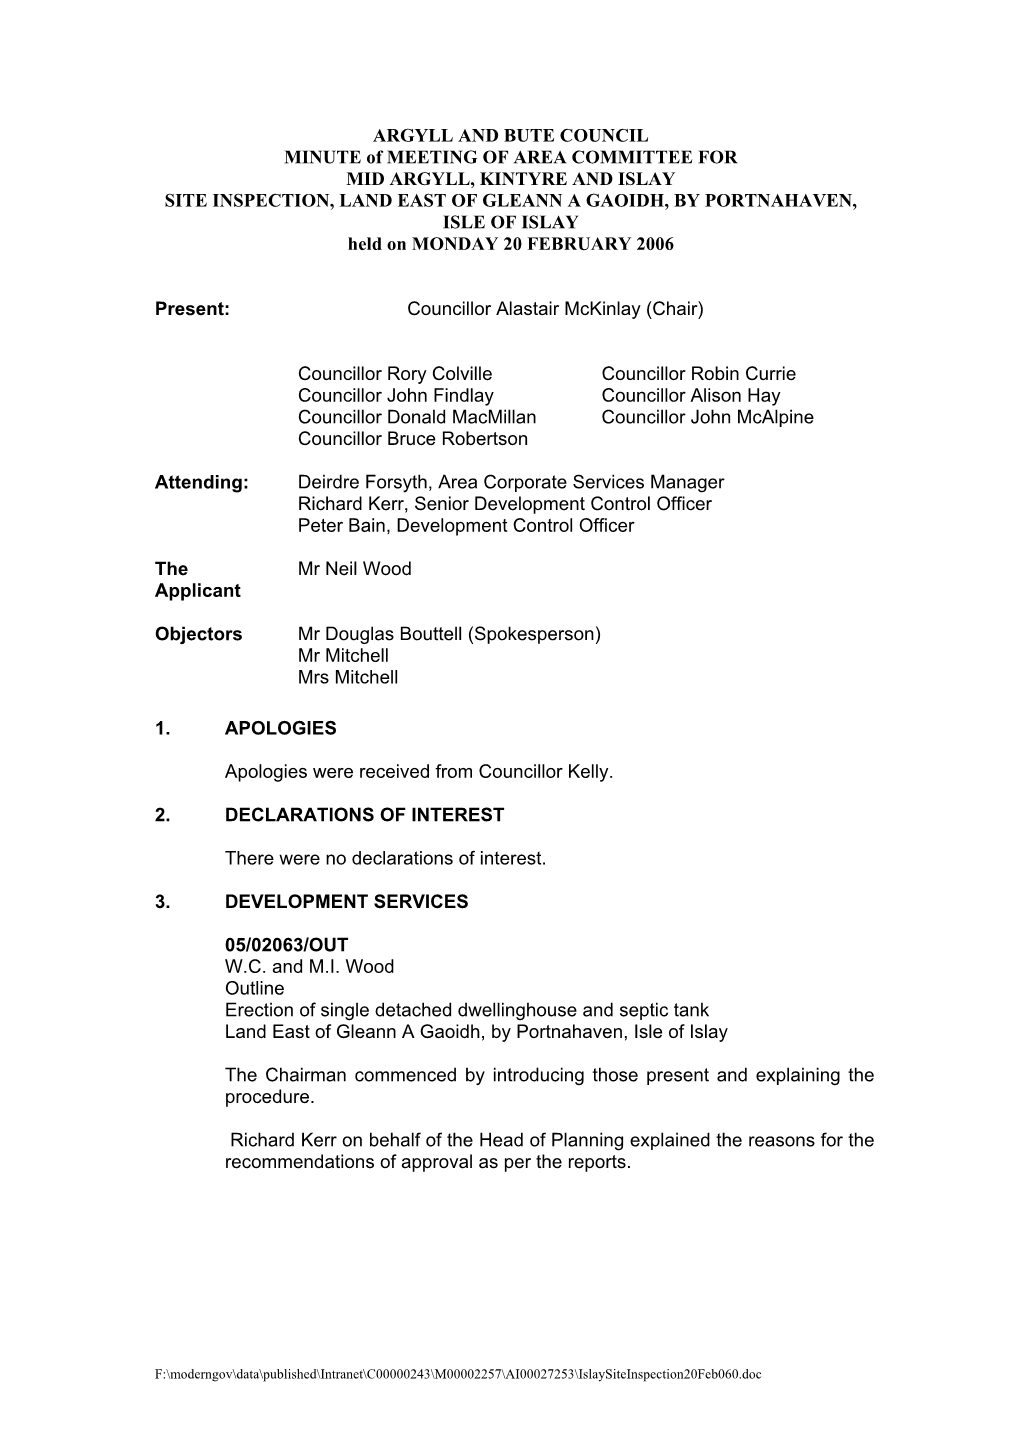 ARGYLL and BUTE COUNCIL MINUTE of MEETING of AREA